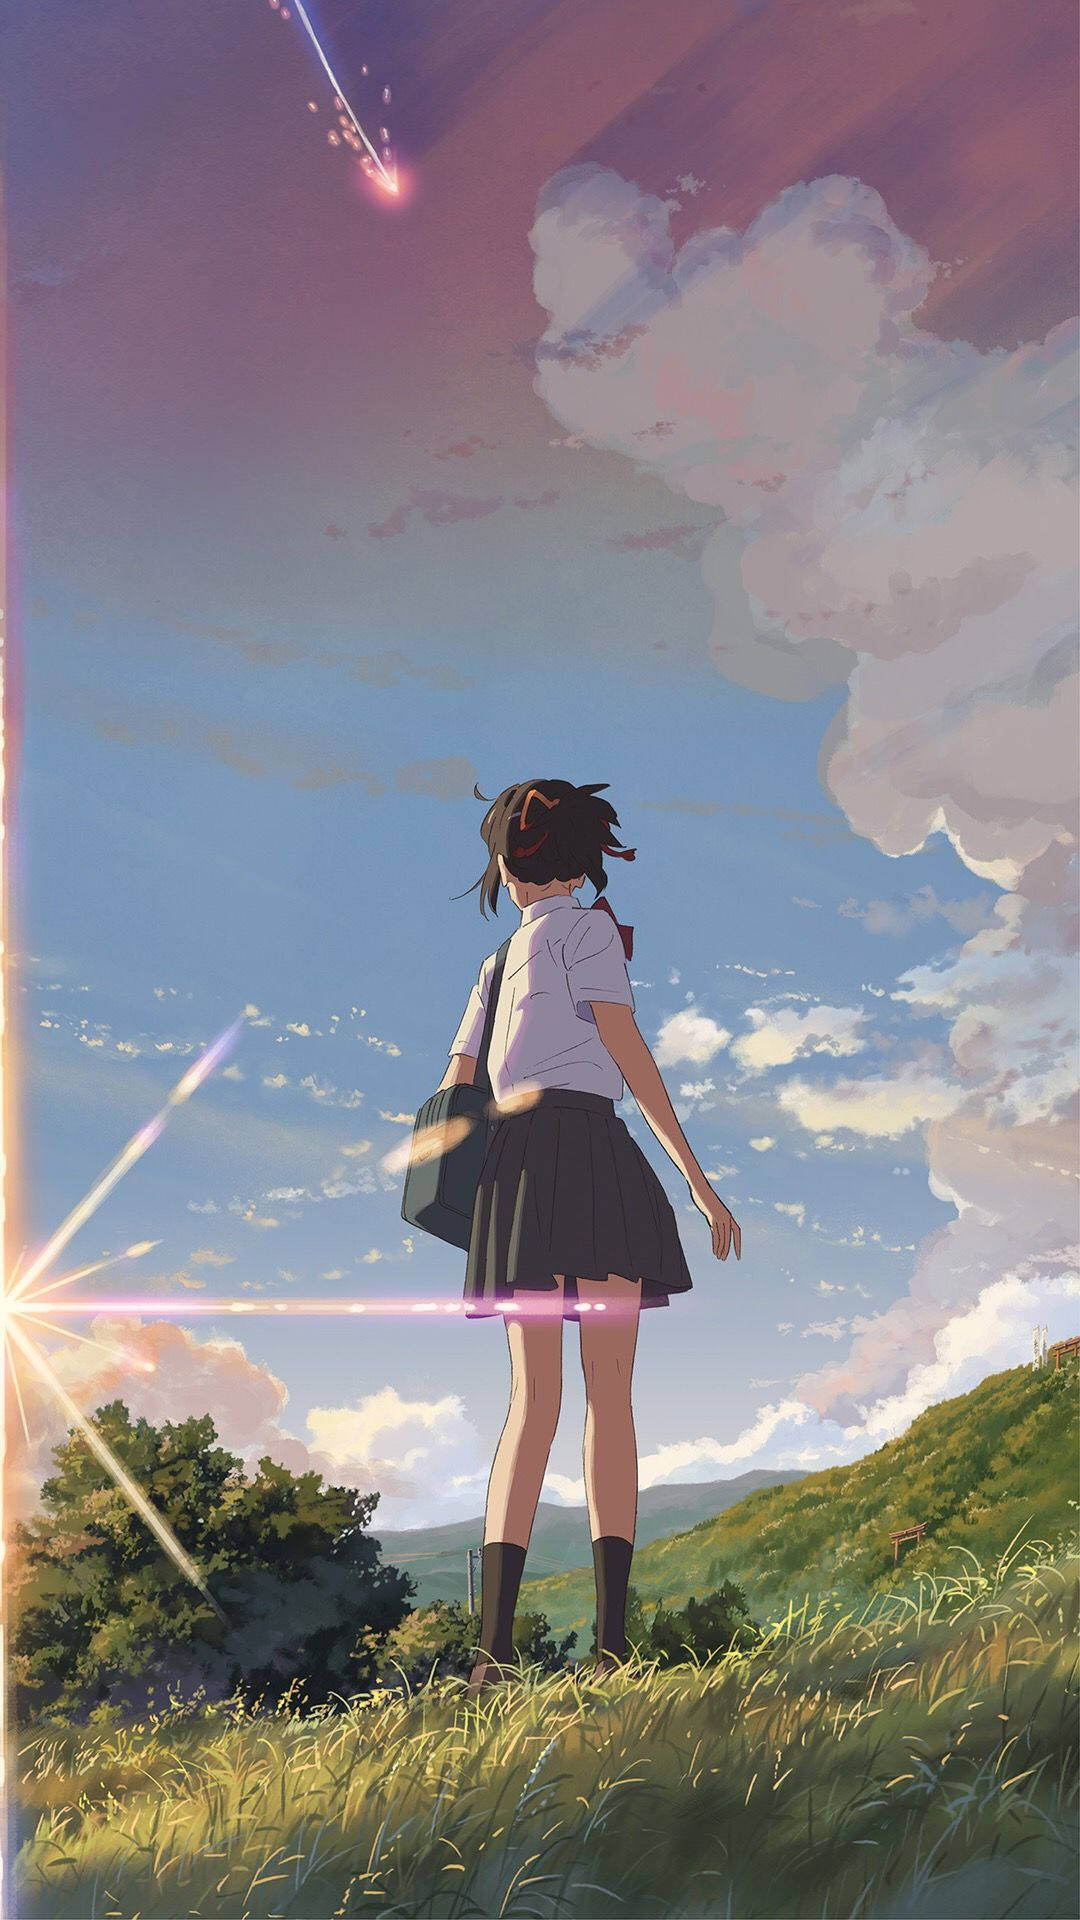 Mitsuha, the heroine of 'Your Name', admiring the beautiful field at sunset Wallpaper